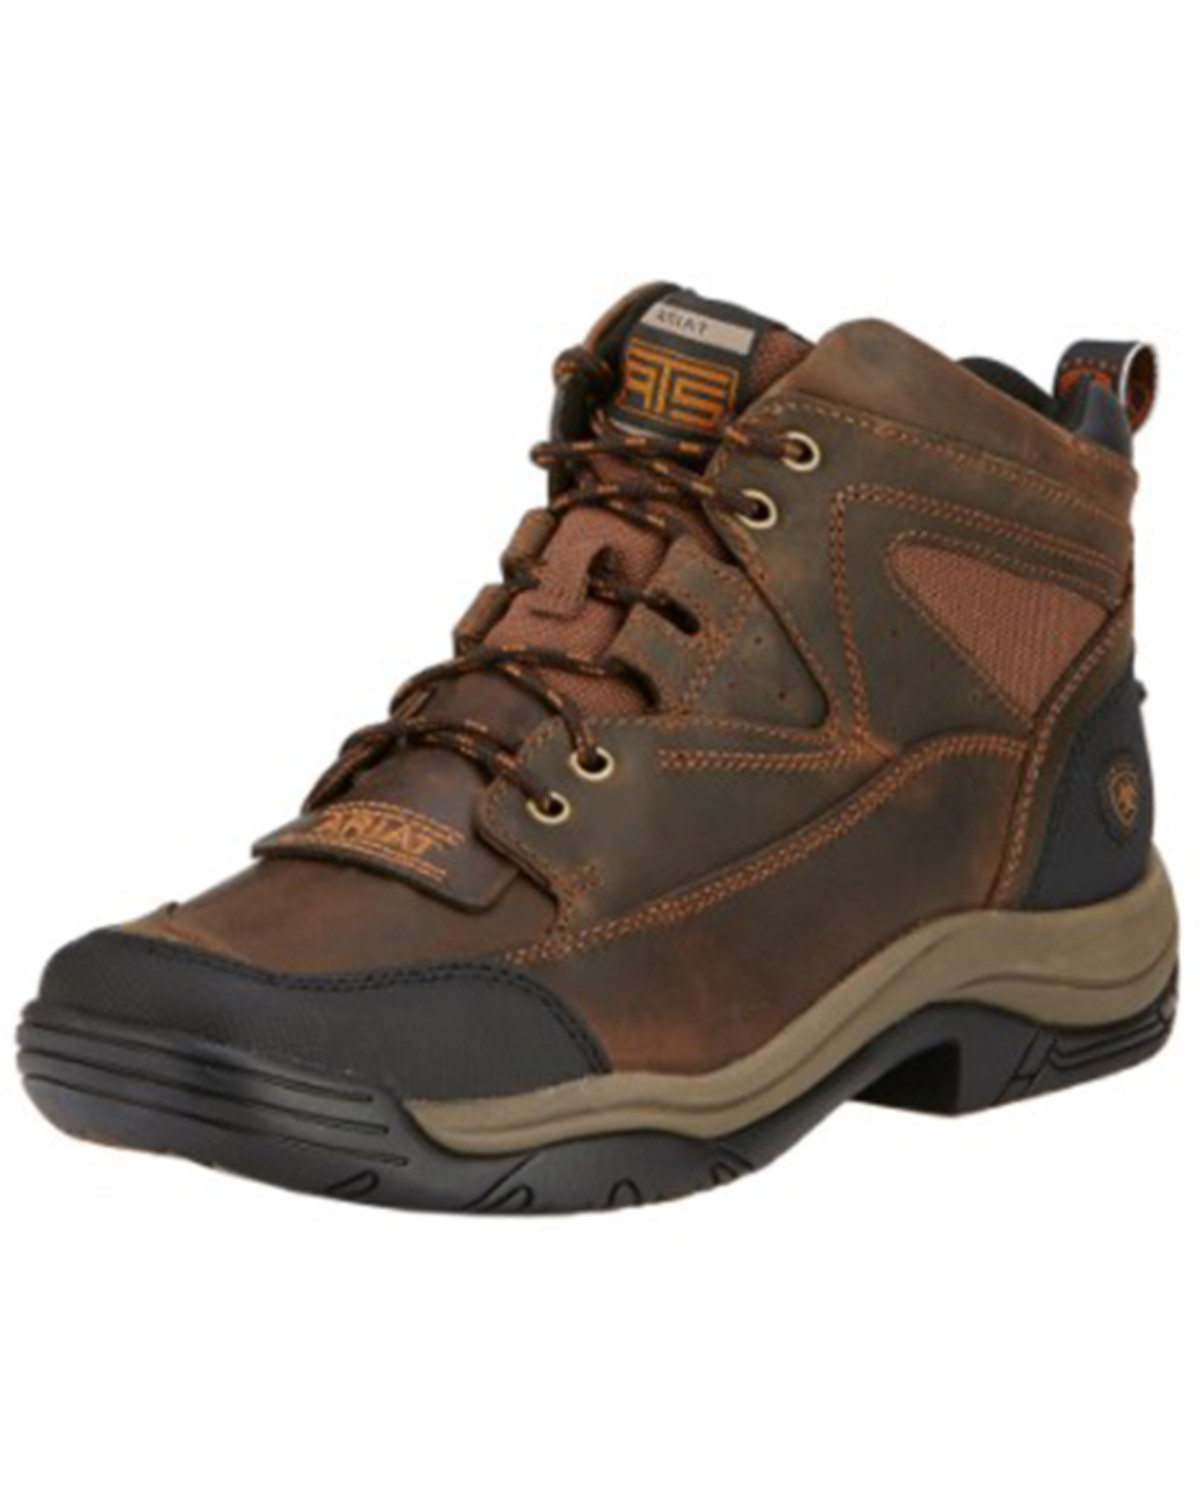 Ariat Terrain Lace-Up Work Boots - Wide Square Toe | Sheplers